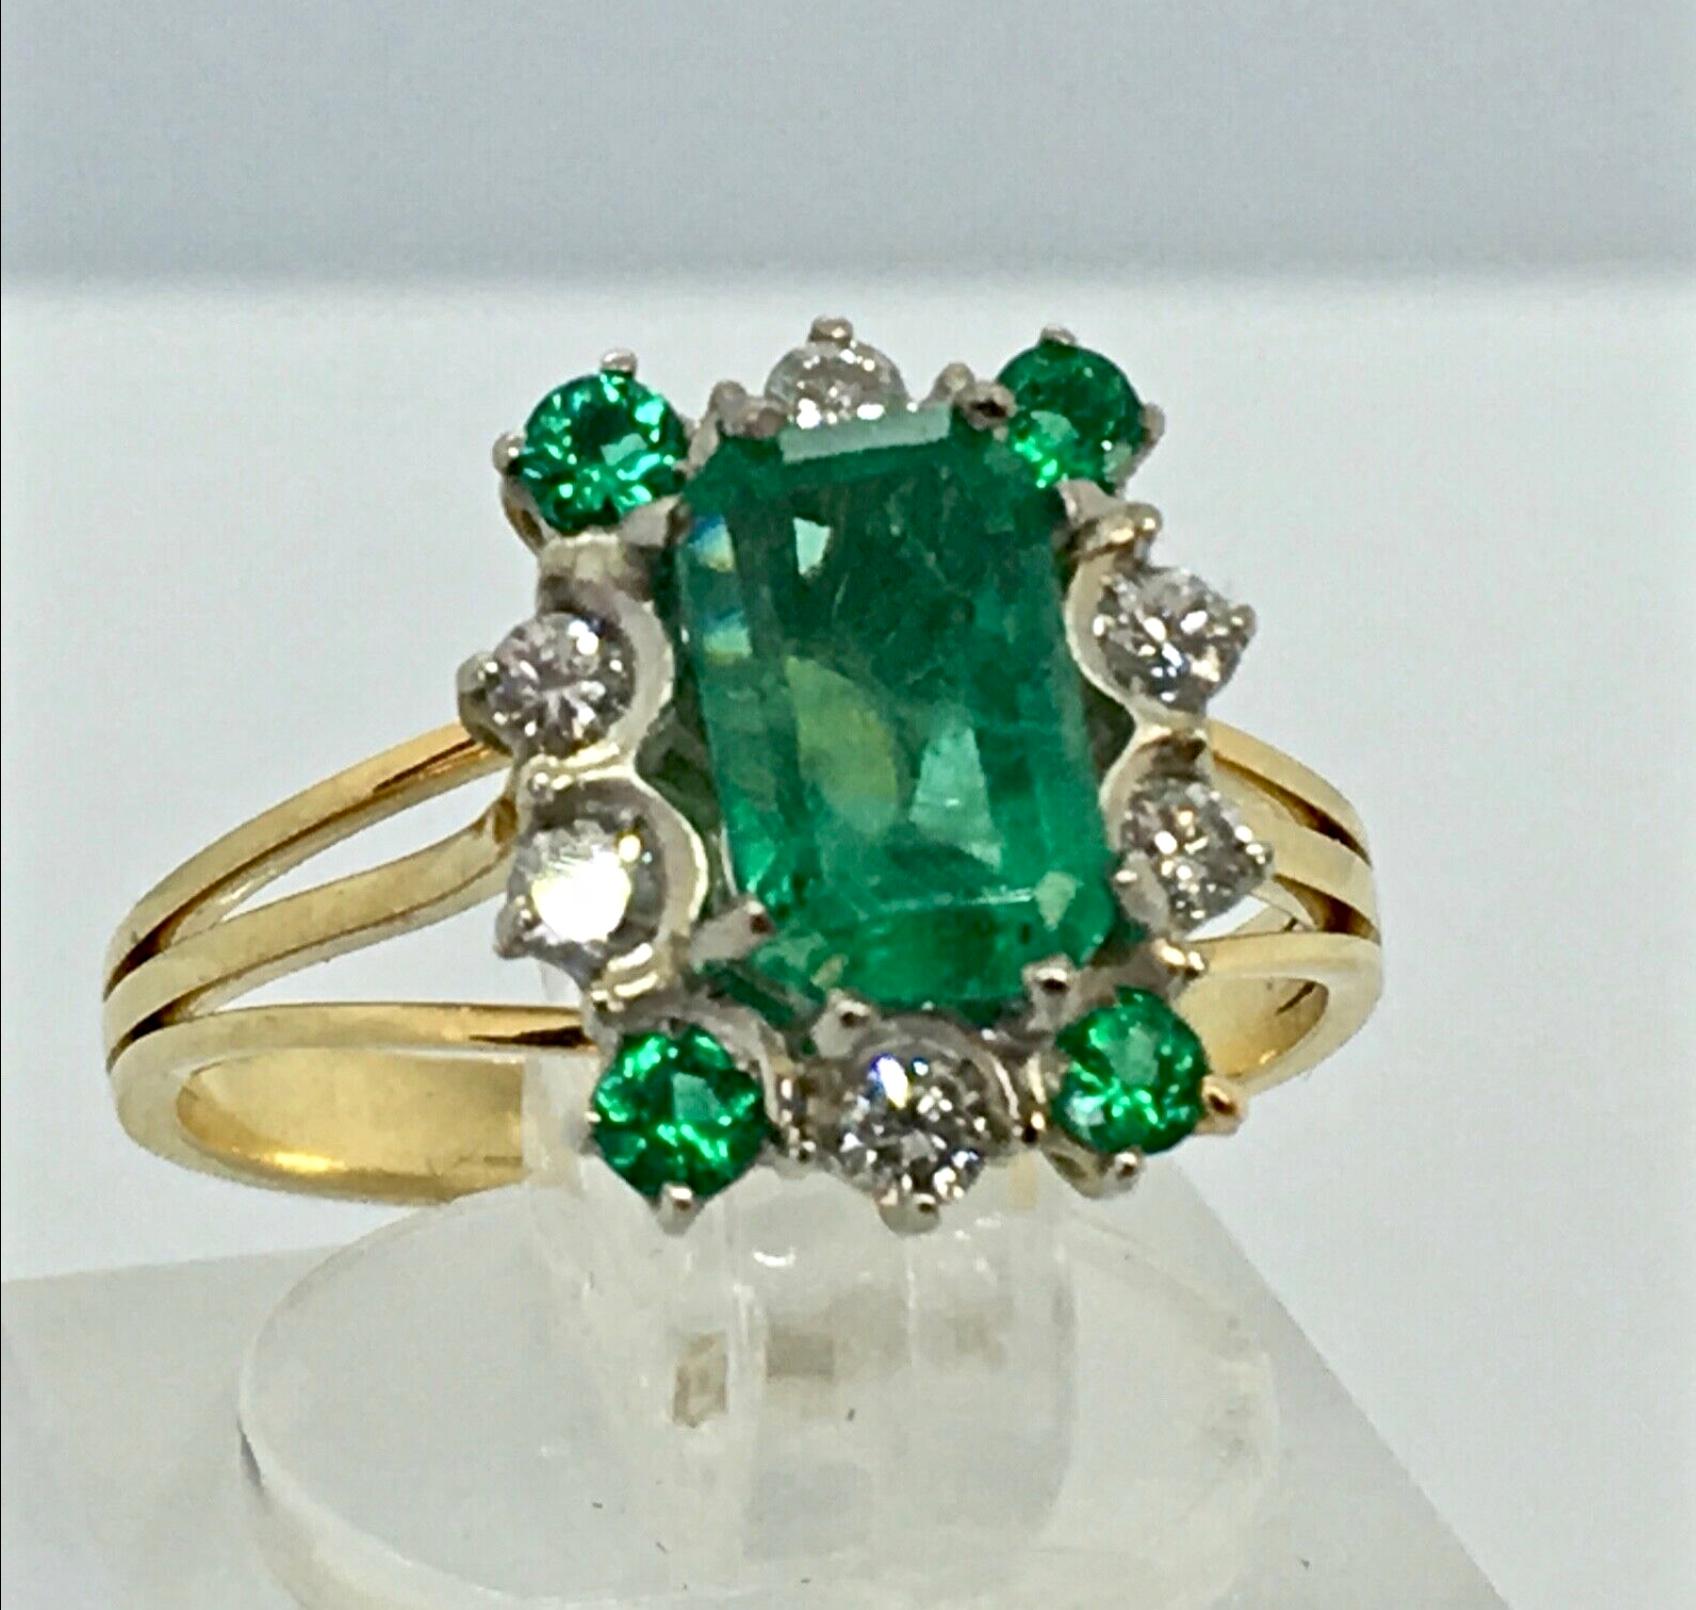 Vintage Stunning Colombian Emerald Solitaire Ring with Accents 

Colombian Emerald and Diamond Ring prong set in White and Yellow solid 18K gold. Feature one Genuine and natural Colombian Emerald (Emerald cut) weighing 2.50ct/ Vivid Medium Green. 